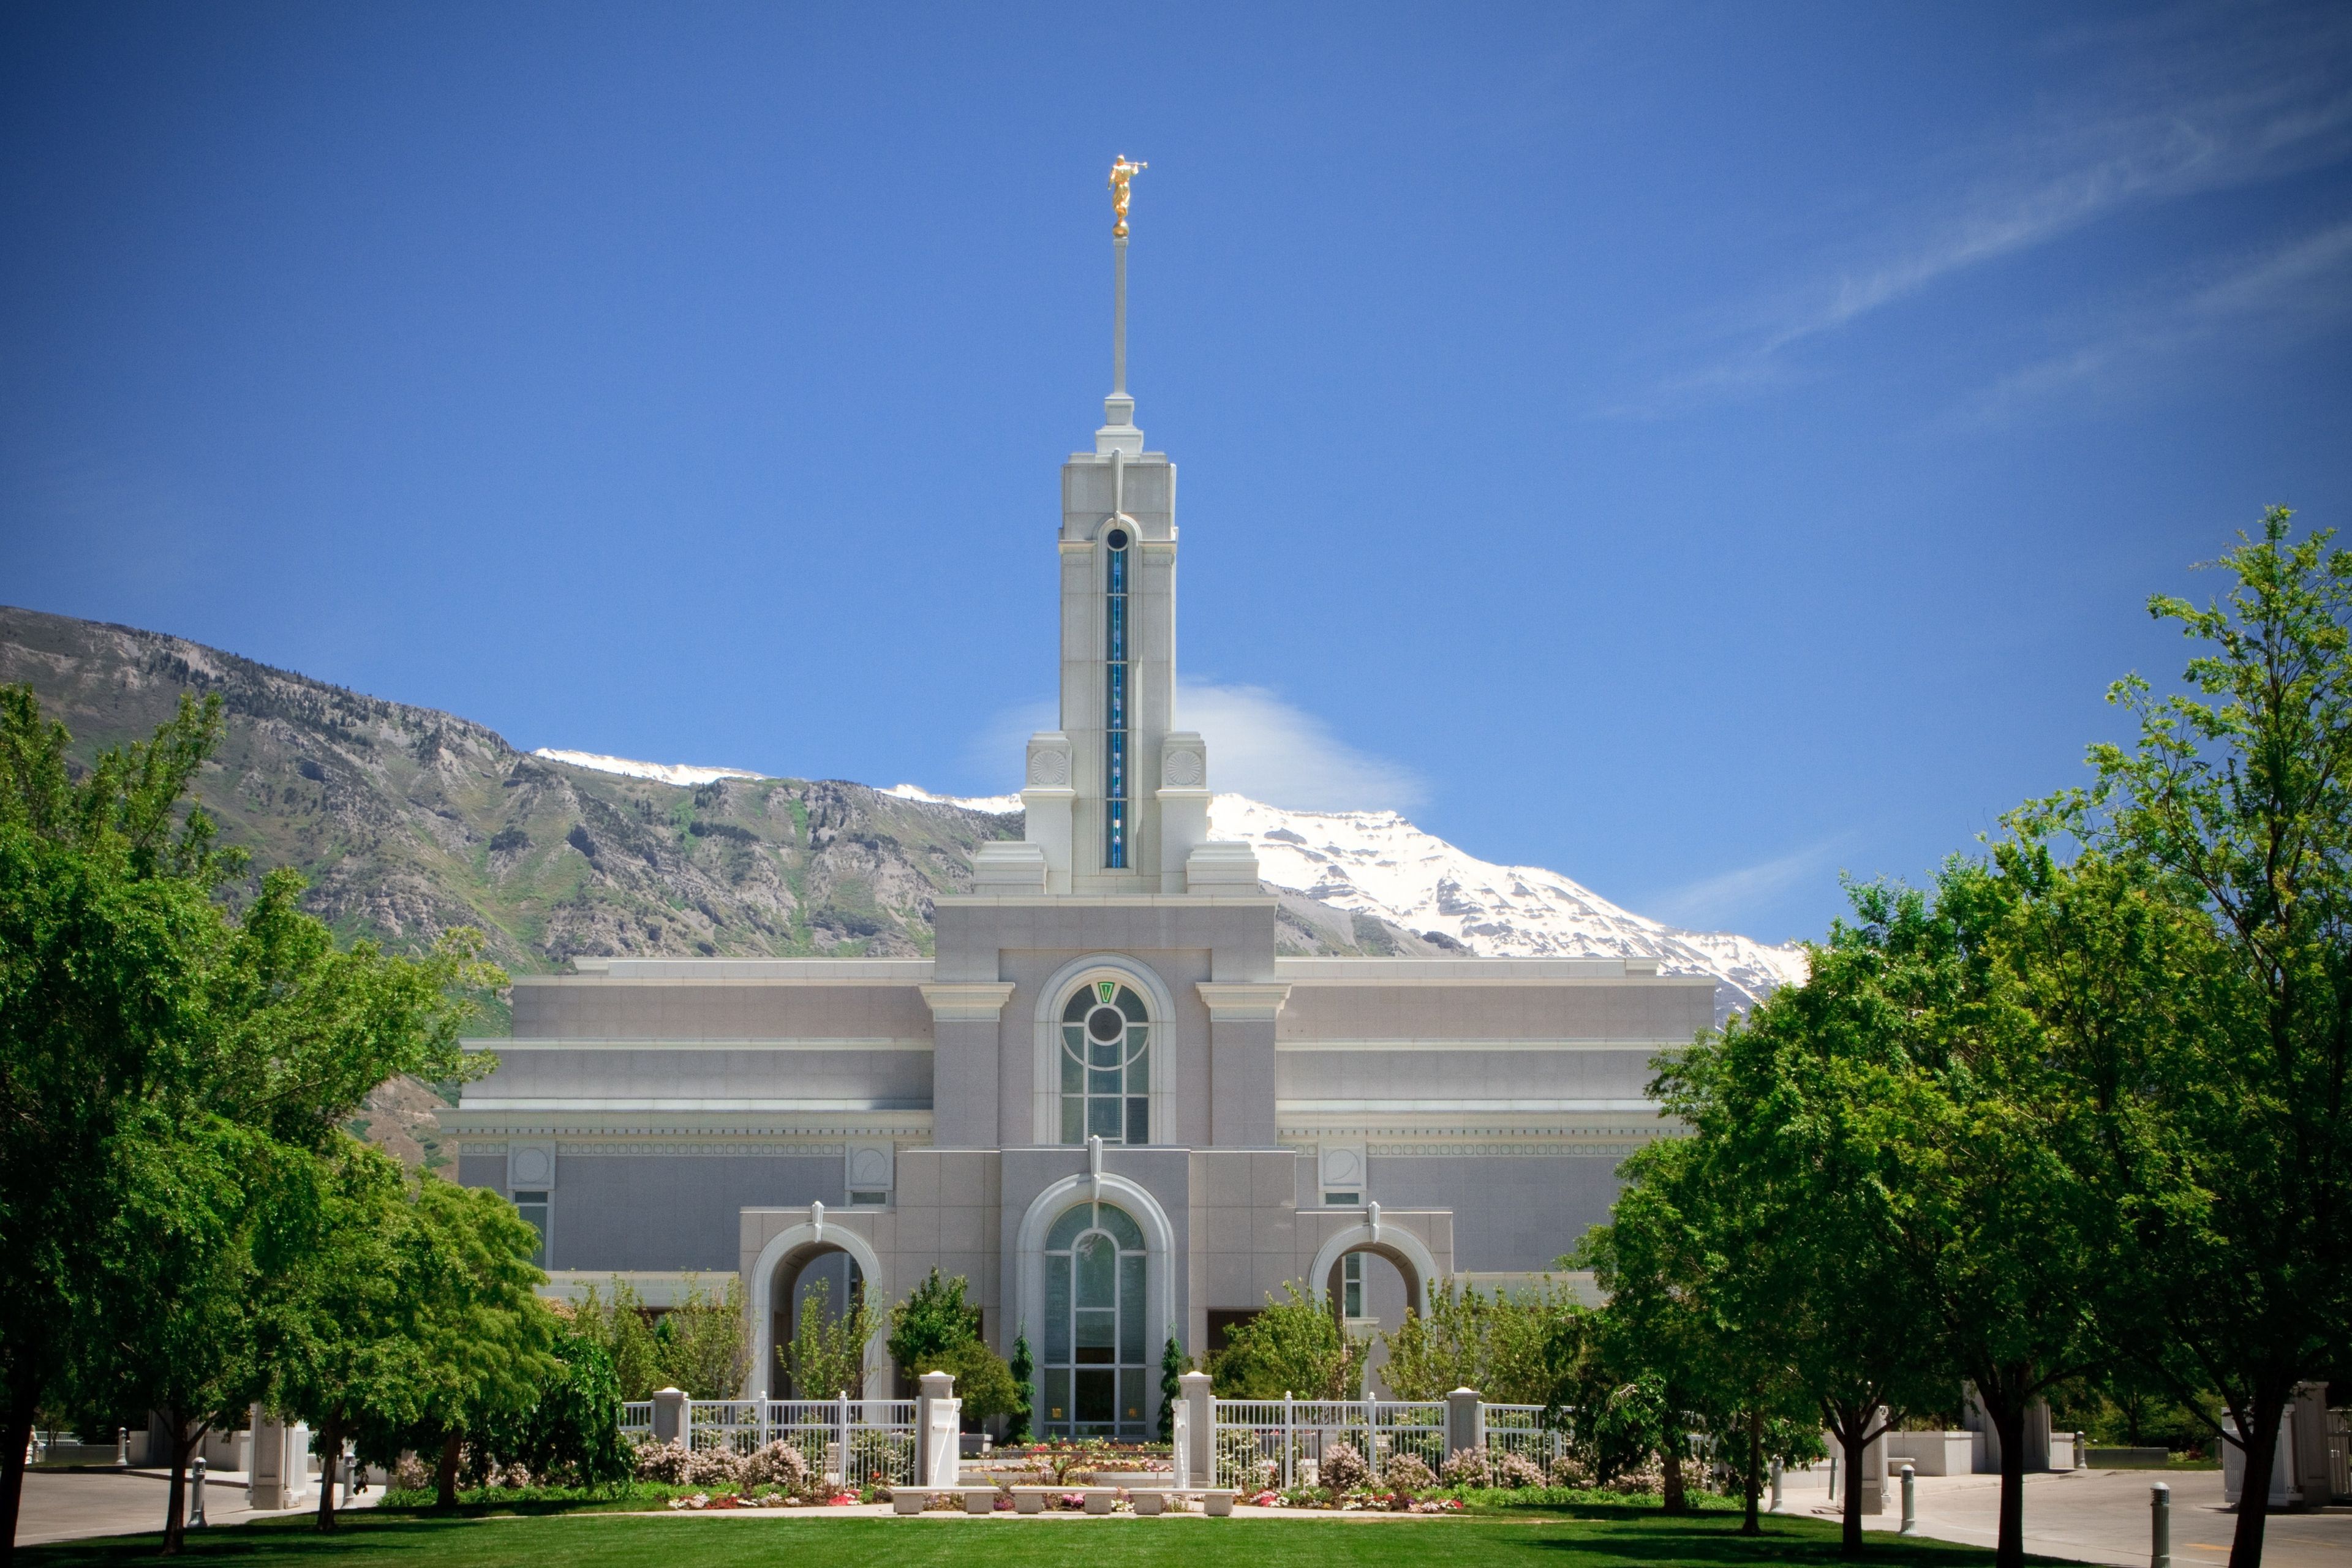 The Mount Timpanogos Utah Temple on a sunny day.